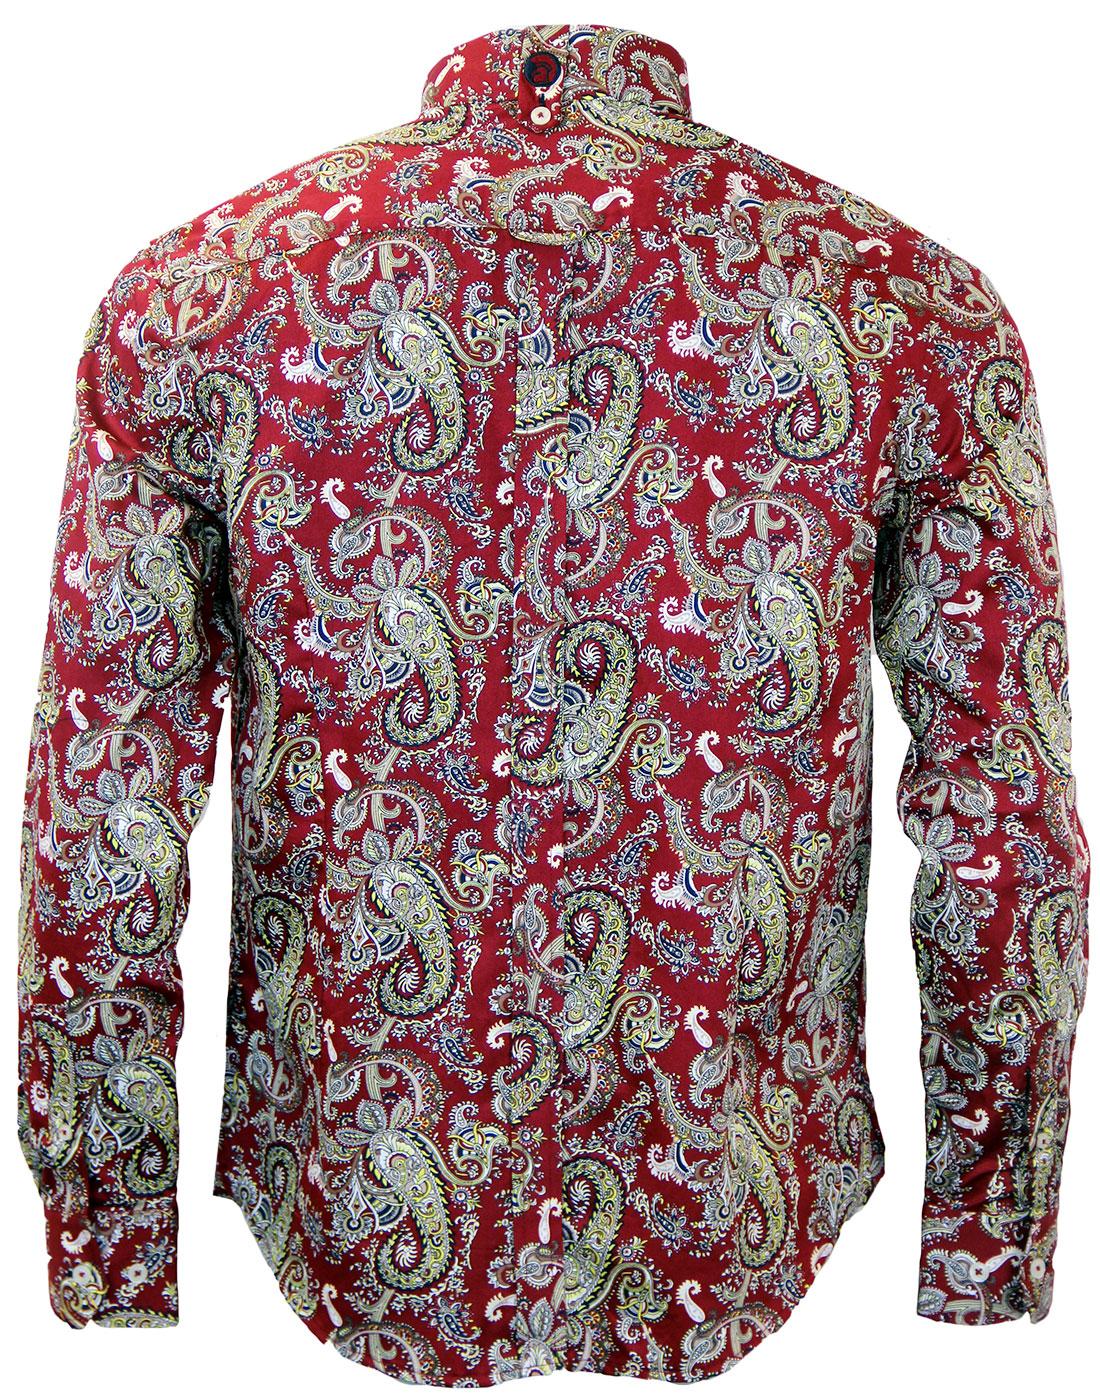 TROJAN RECORDS 1960s Psychedelic Paisley Mod Button Down Shirt